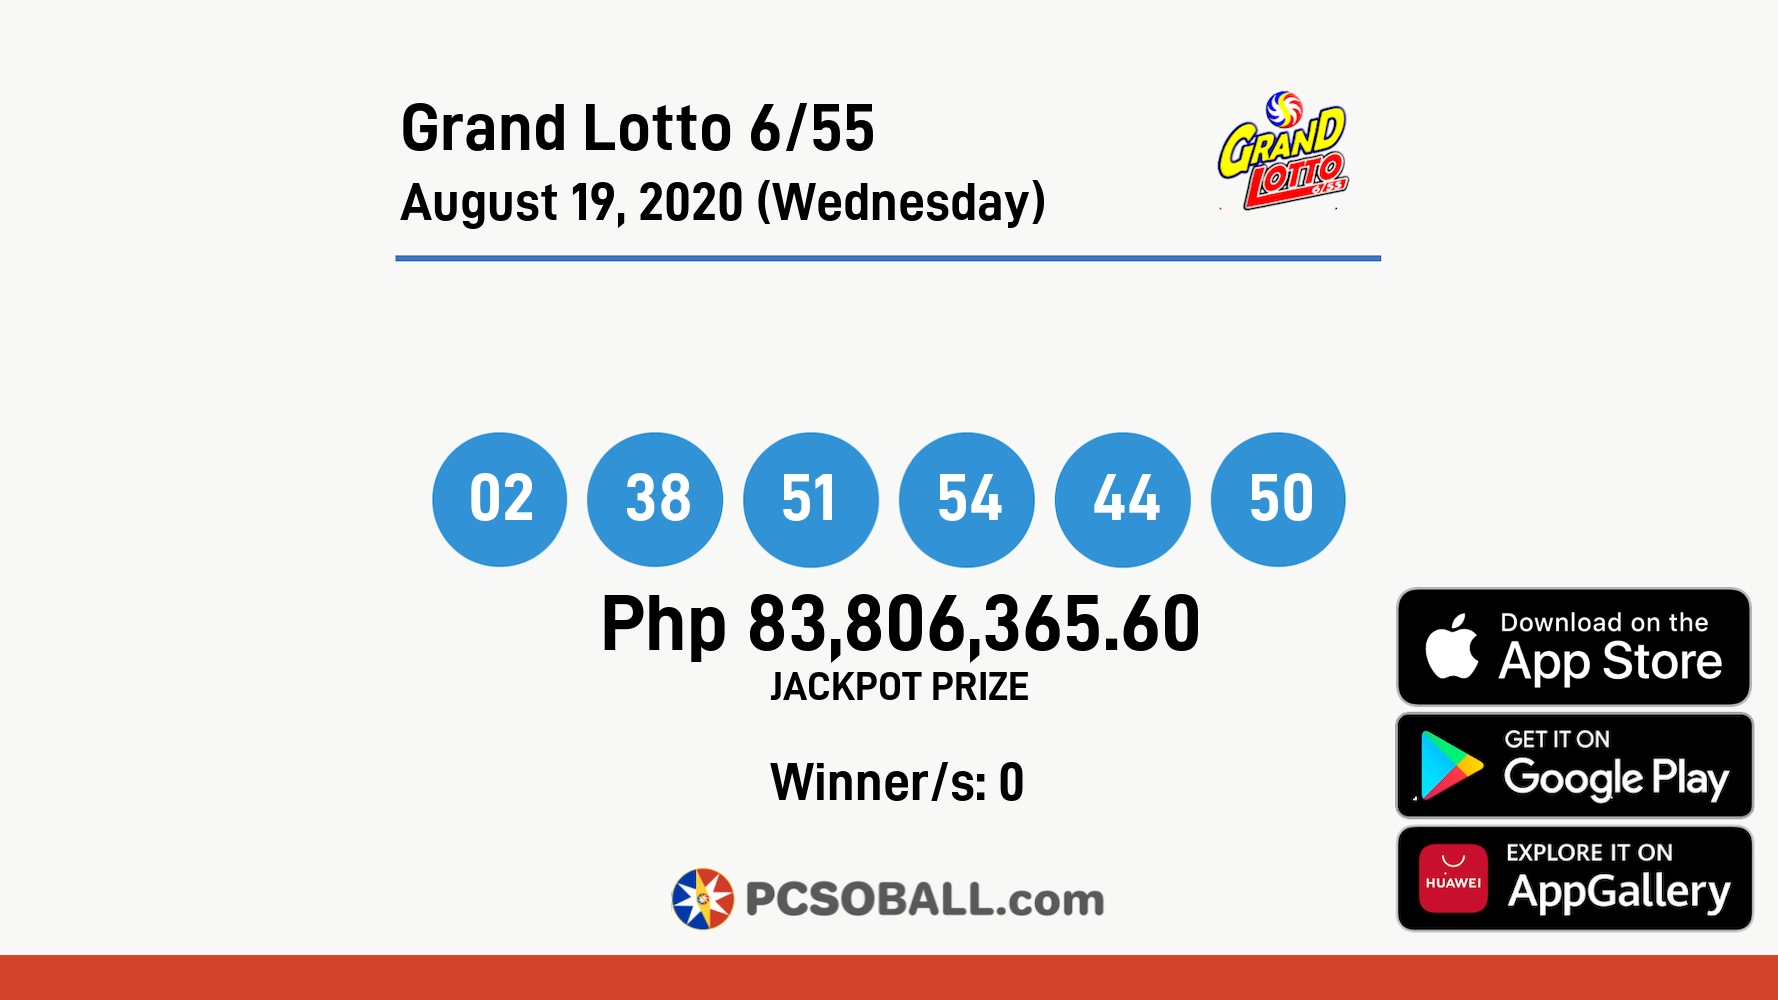 Grand Lotto 6/55 August 19, 2020 (Wednesday) Result